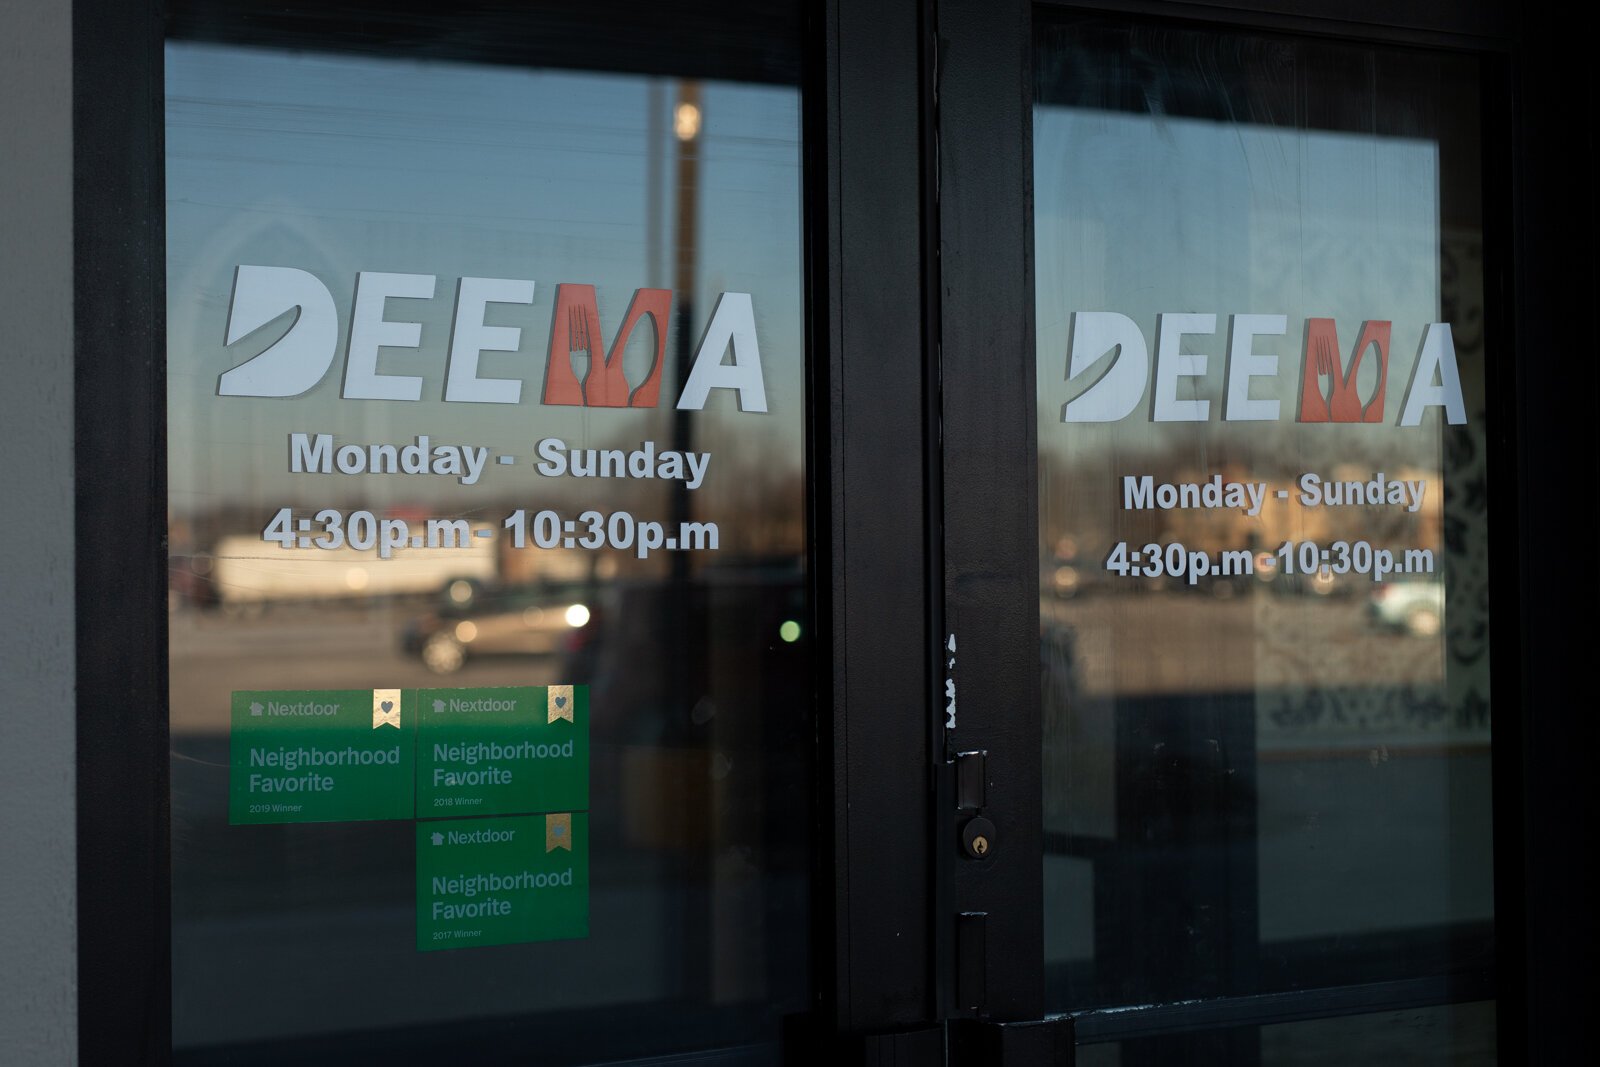 Deema is located in the former Yen Ching spot in Covington Plaza at 6410 W. Jefferson Blvd.